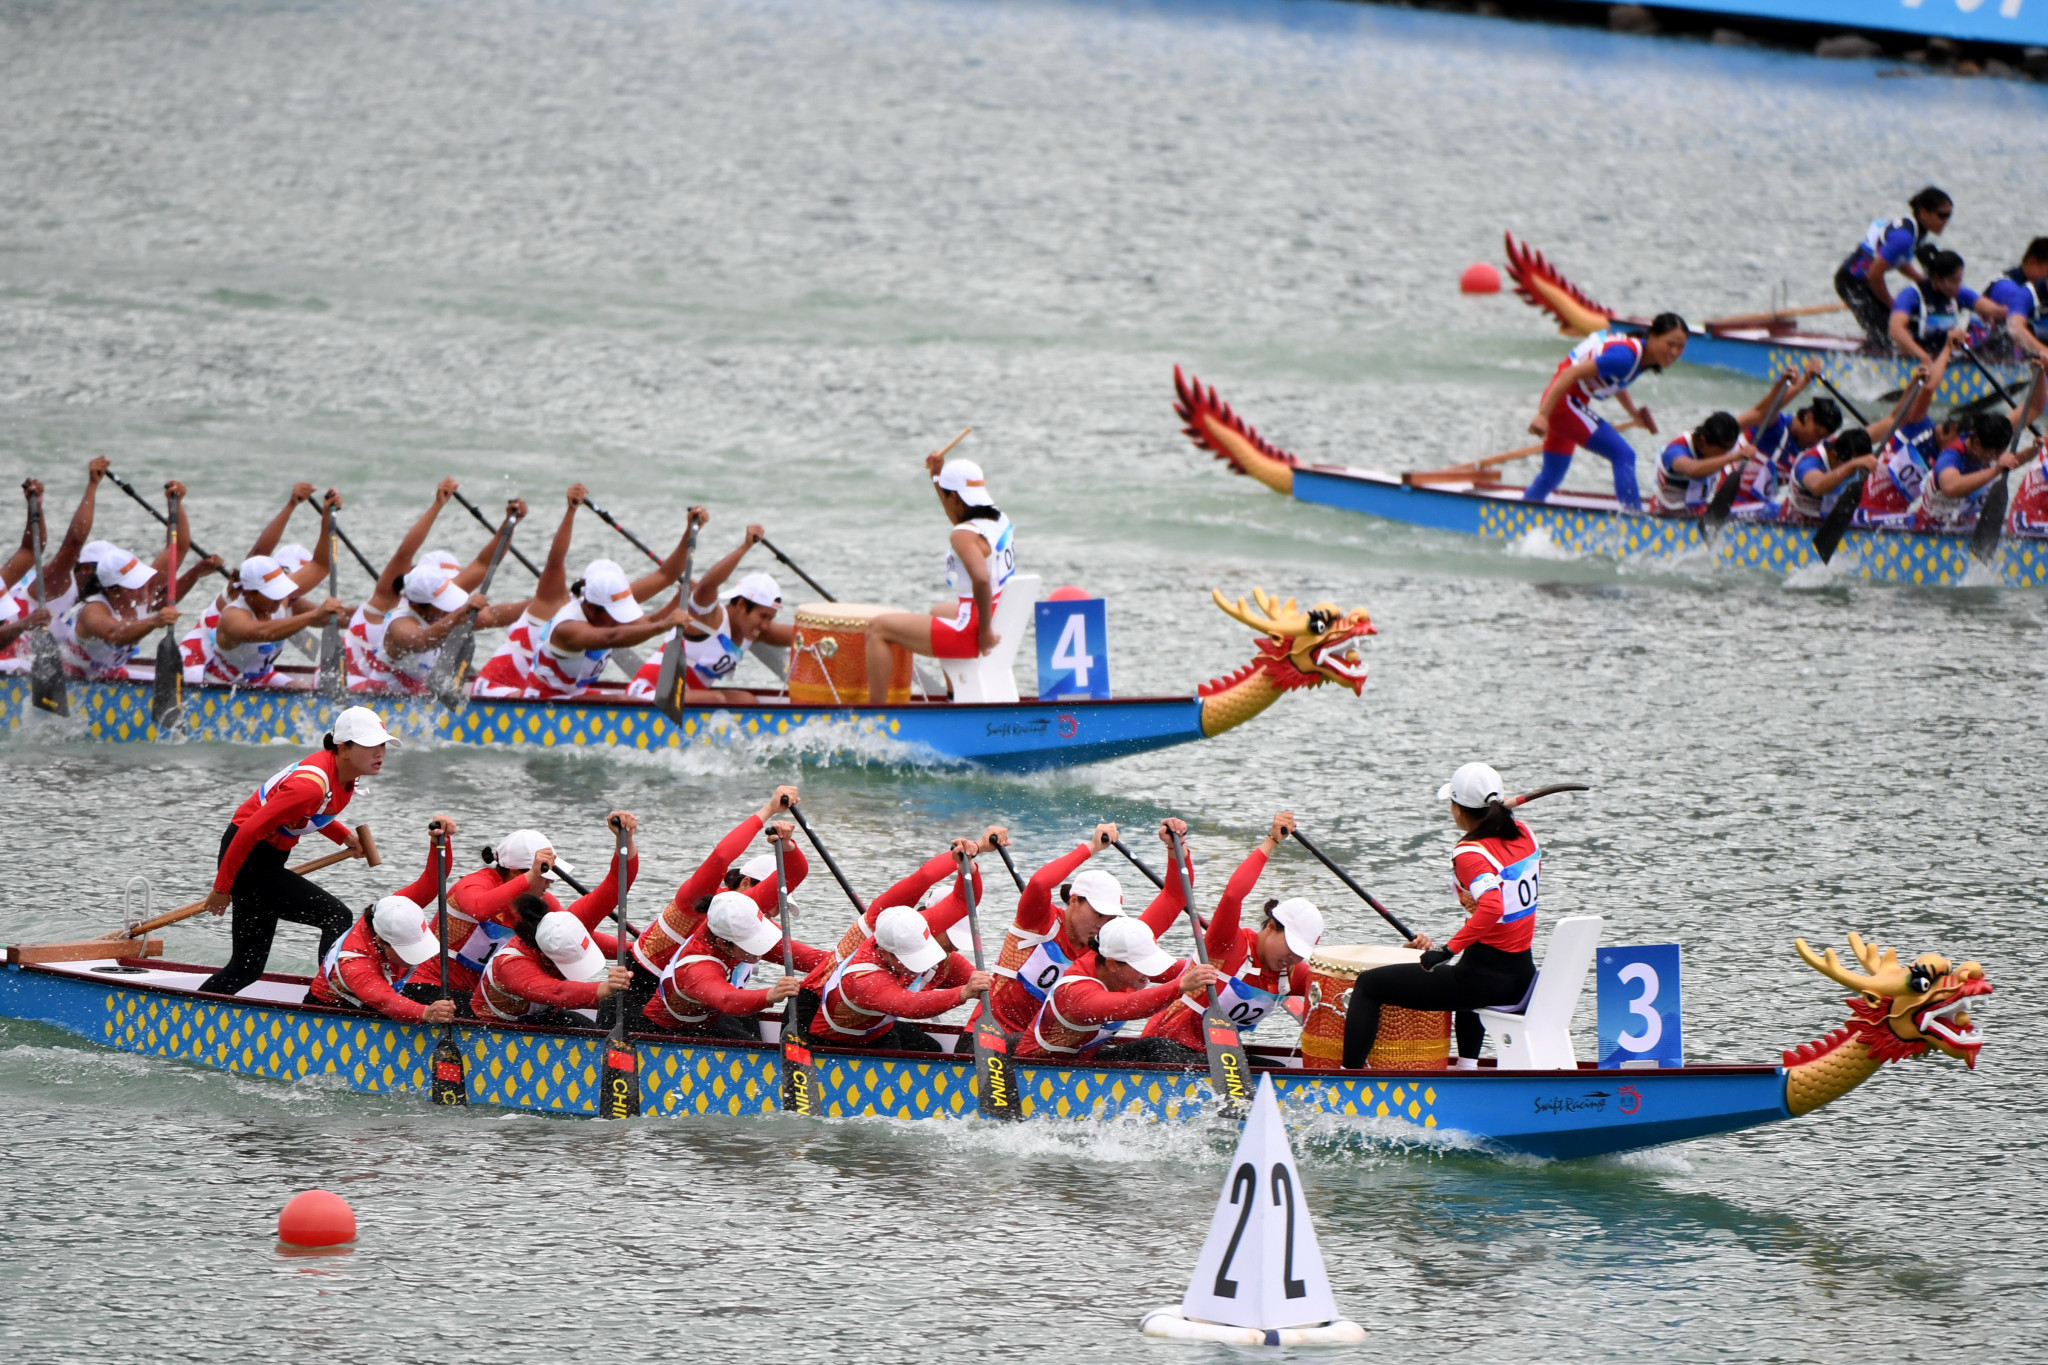 China got revenge over Indonesia in the women's dragon boat final after the country's men had lost to them in the race prior ©Hangzhou 2022